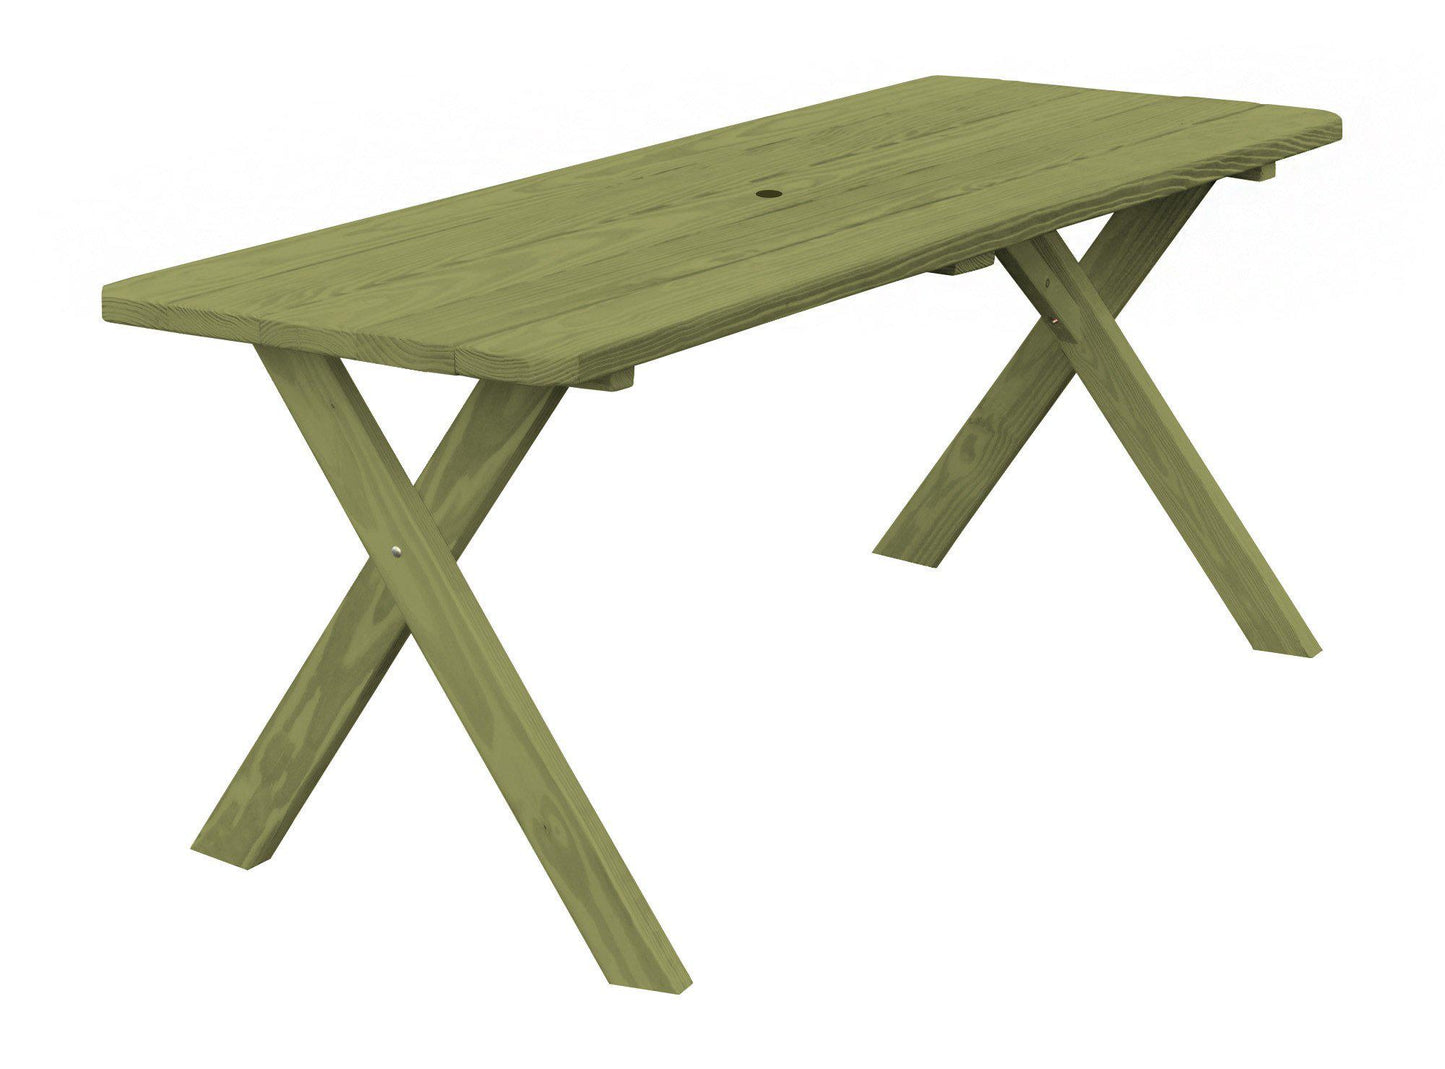 A&L Furniture Co. Yellow Pine 95" Cross-leg Table Only - Specify For Free 2" Umbrella Hole - LEAD TIME TO SHIP 10 BUSINESS DAYS